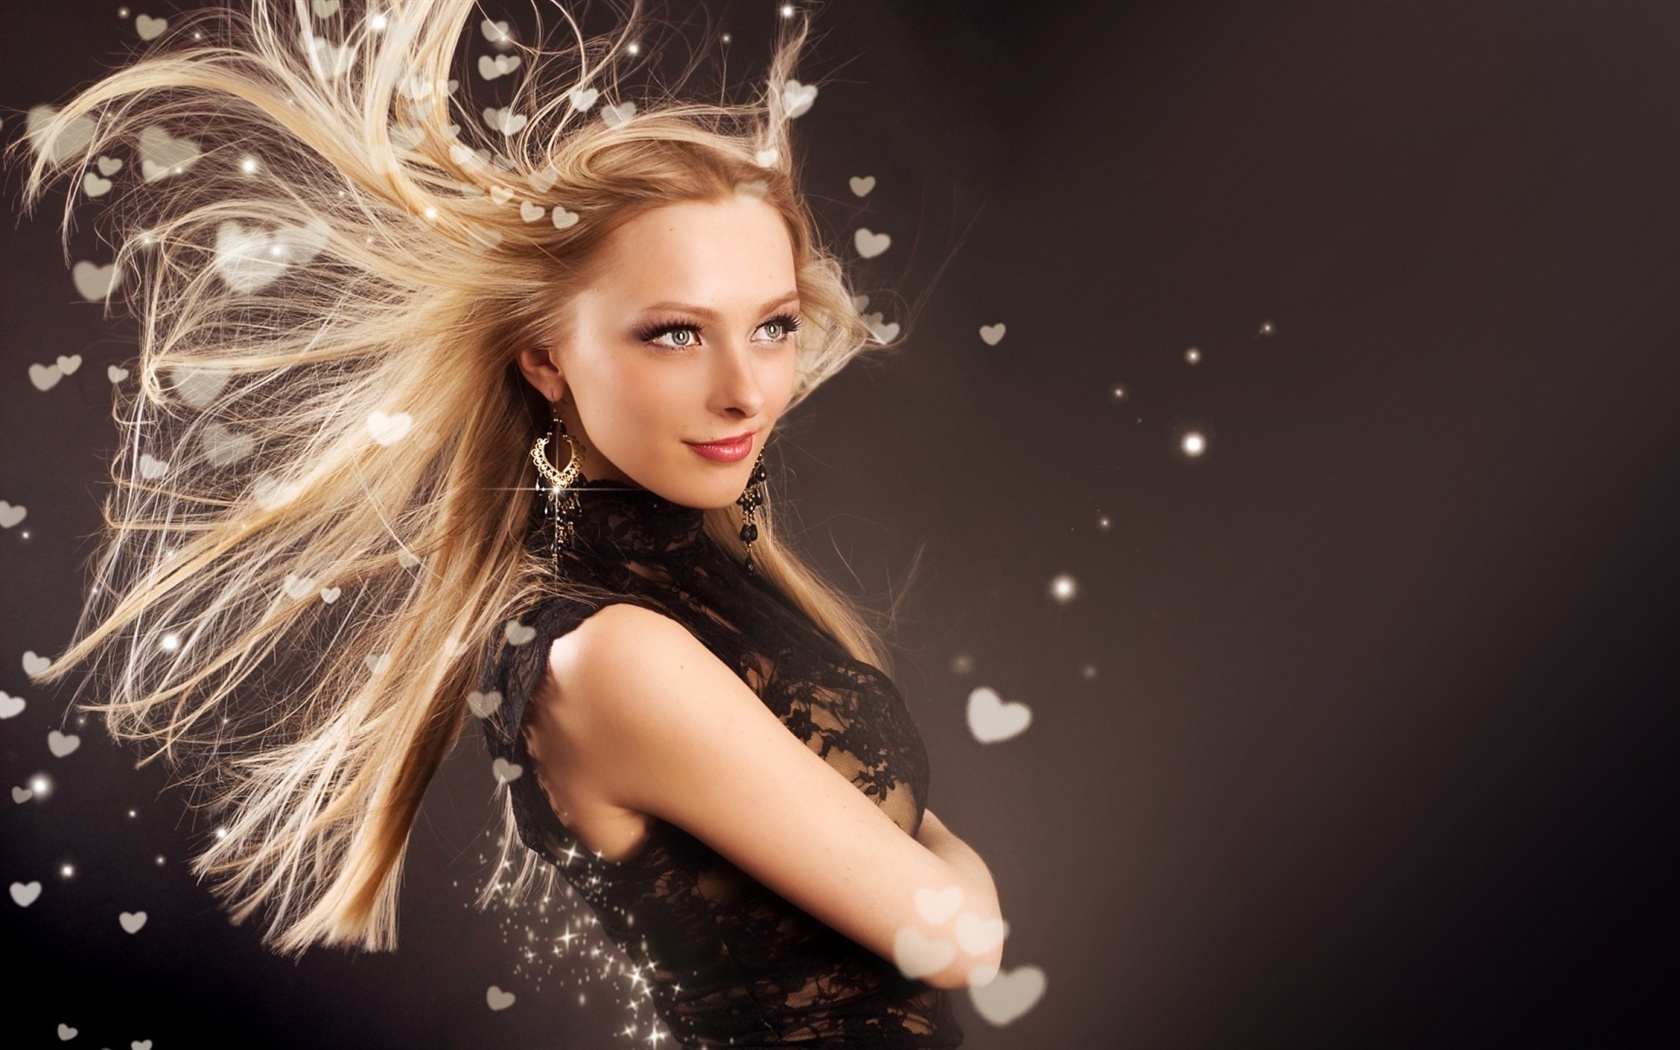 Wallpaper Fashion girl hair flying 1920x1080 Full HD 2K Picture, Image